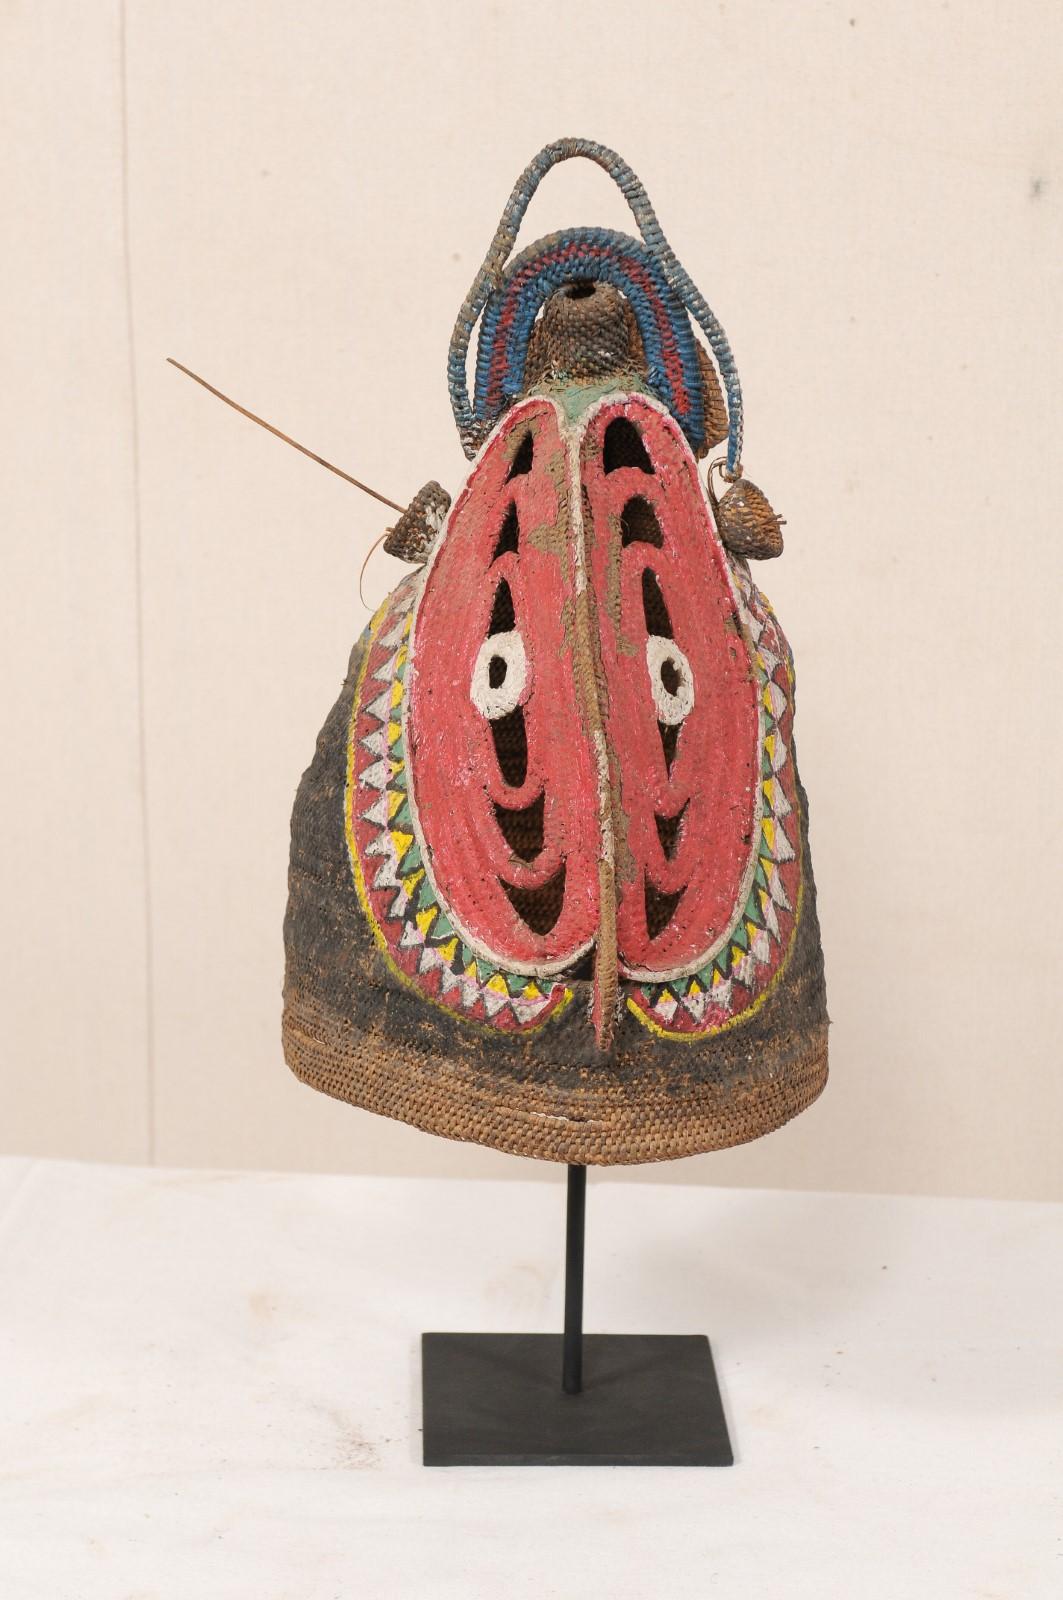 Tribal Vibrantly Colored Baba Festival Mask on Stand from Papua New Guinea